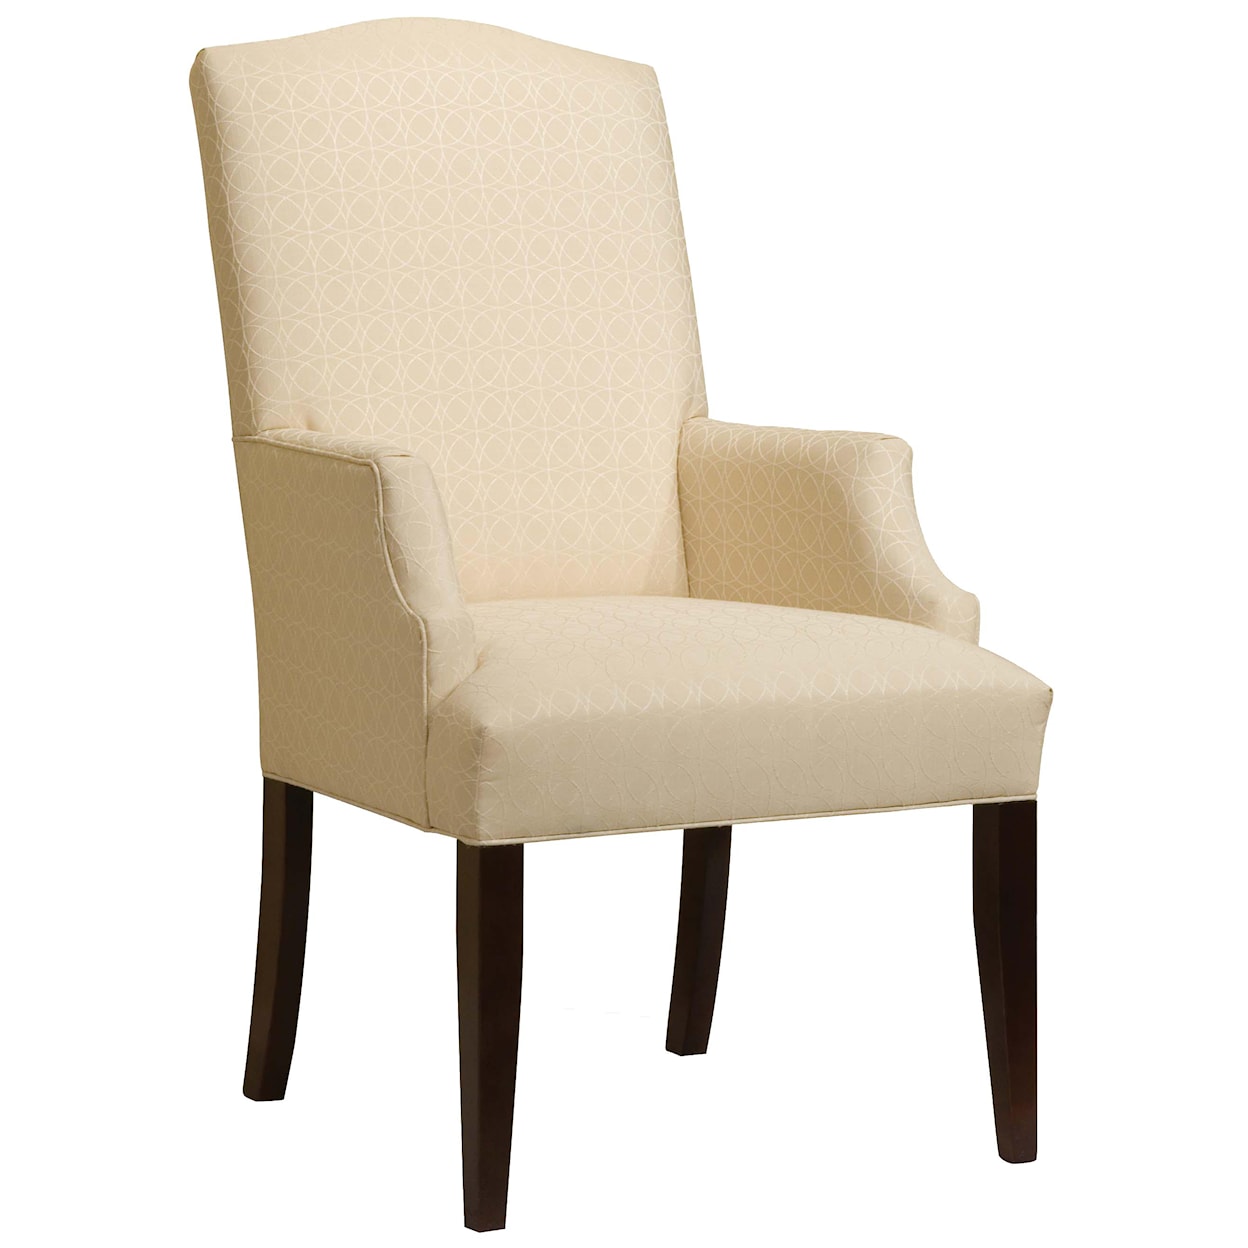 Fairfield Chairs Upholstered Arm Chair